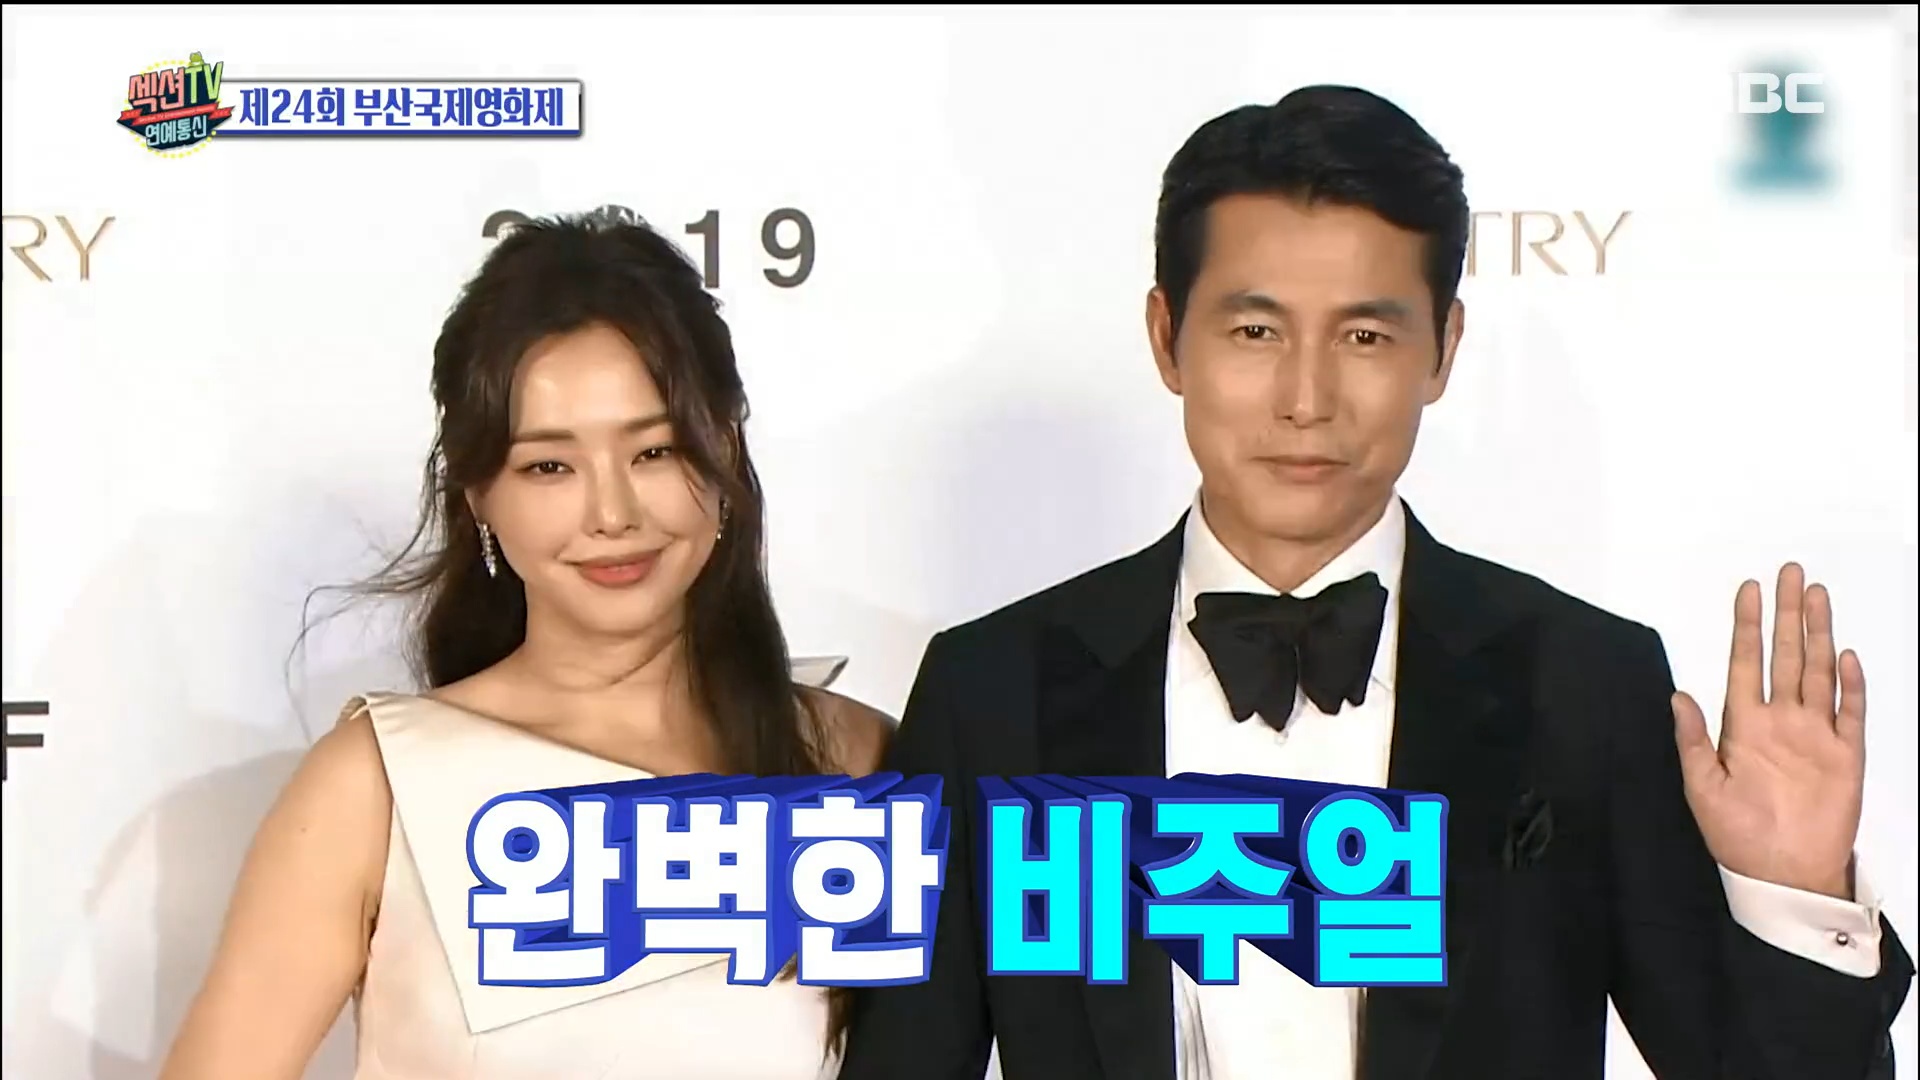 The section TV Entertainment Communication, which aired on the 3rd, unveiled the opening ceremony of the 24th Busan International Film Festival.The Busan International Film Festival, which will be held from today to December 12, will feature 303 films from 85 countries.The first star to appear on Red Carpet is Jung Woo-sung, who was in charge of the opening ceremony.Lee Ha-nui, who was in charge of the society together, appeared and heated the film festival scene.Jo Jung-suk and Im Yoon-ah, the main characters of Exit, which led the box office this summer, appeared and shined.Ryu Seung-yong, Jin Sun-gyu, Lee Dong-hwi, Gong Myeong and director Lee Byung-hun of Extreme Jobs, which became the first 10 million films in 2019, also received cheers from fans.Cho Yeo-jung of Parasite, who won the Cannes Golden Palm Prize, and Chun Woo-hee, who became the mainstream actor with the drama Melloga Constitution, also shined Red Carpet.Cho Jin-woong, Kwon Yul, Jung Hae-in, Suho, and Son Hyun-joo attended the event, and Ahn Sung-ki, Kwon Hae-hyo, Son Sook and Kim Hee-ra also participated in the 24th Busan International Film Festival,iMBC Lim Joo-hee  Screen Capture MBC